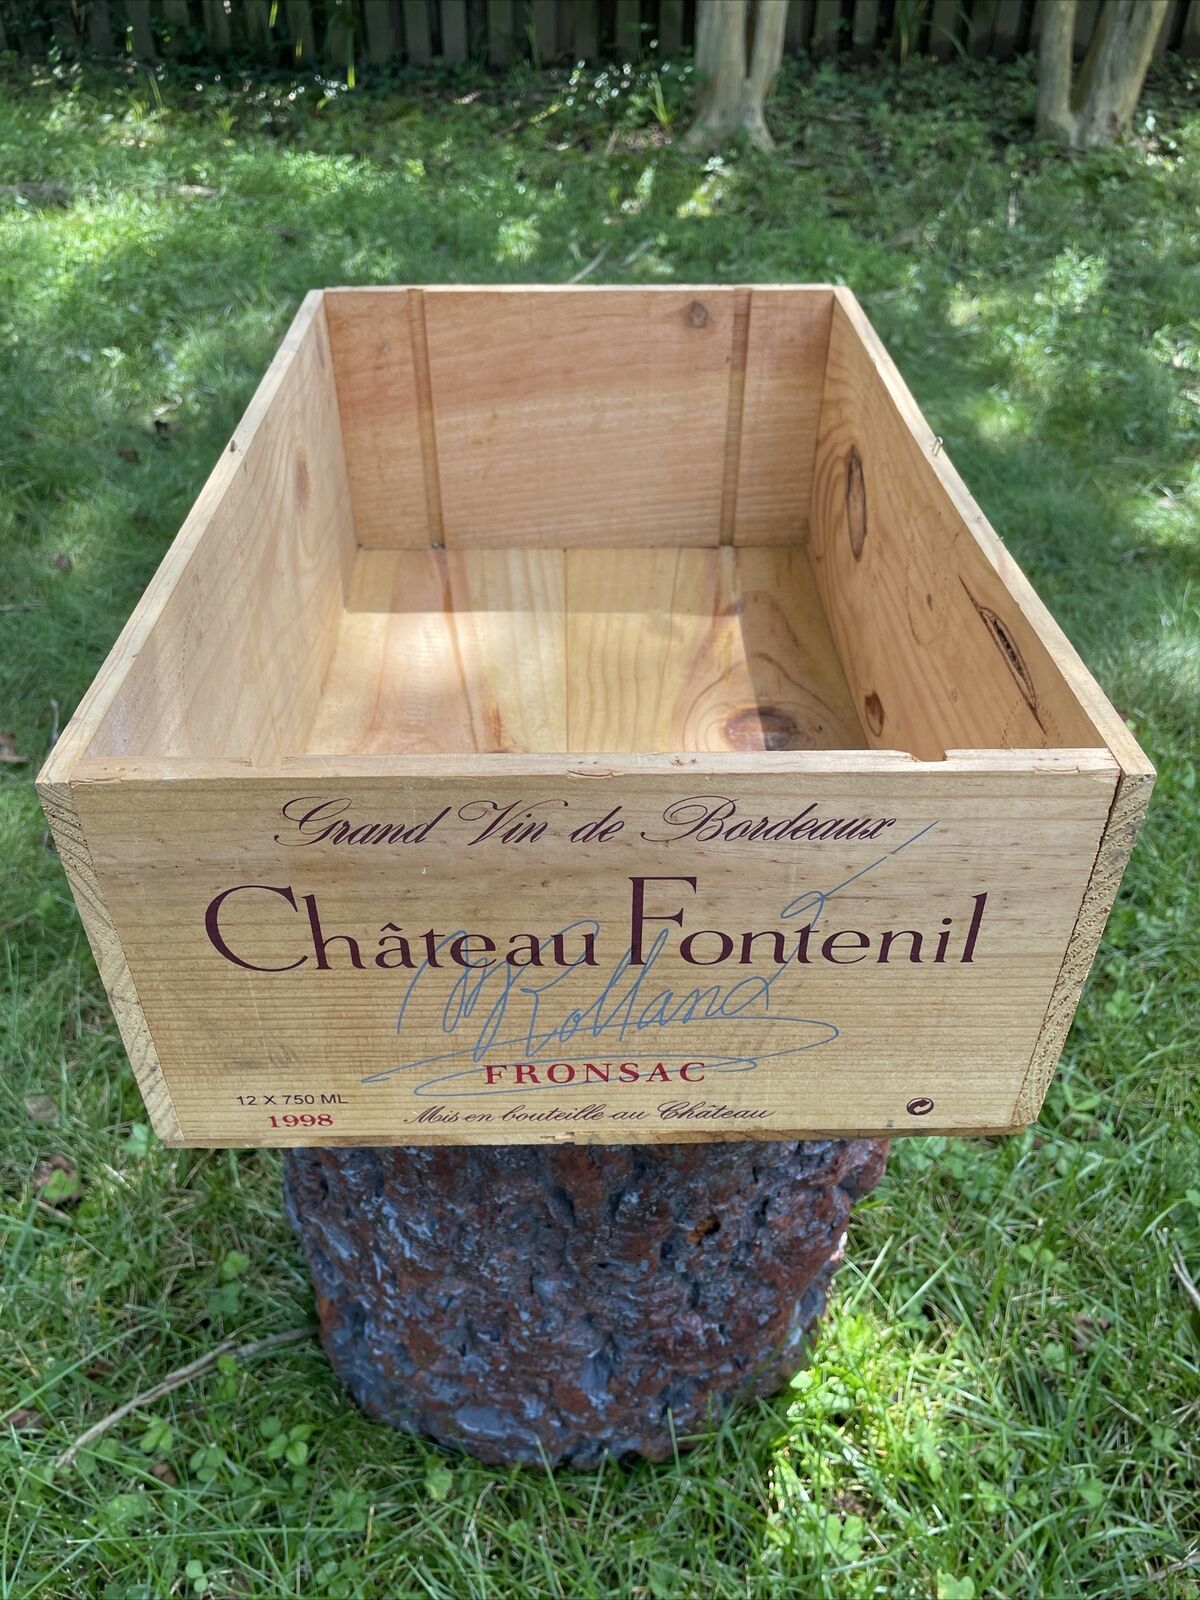 RARE CHATEAU FONTENIL FRONSAC 1998 Wooden Crate-Wine Case with Sign M. Rolland